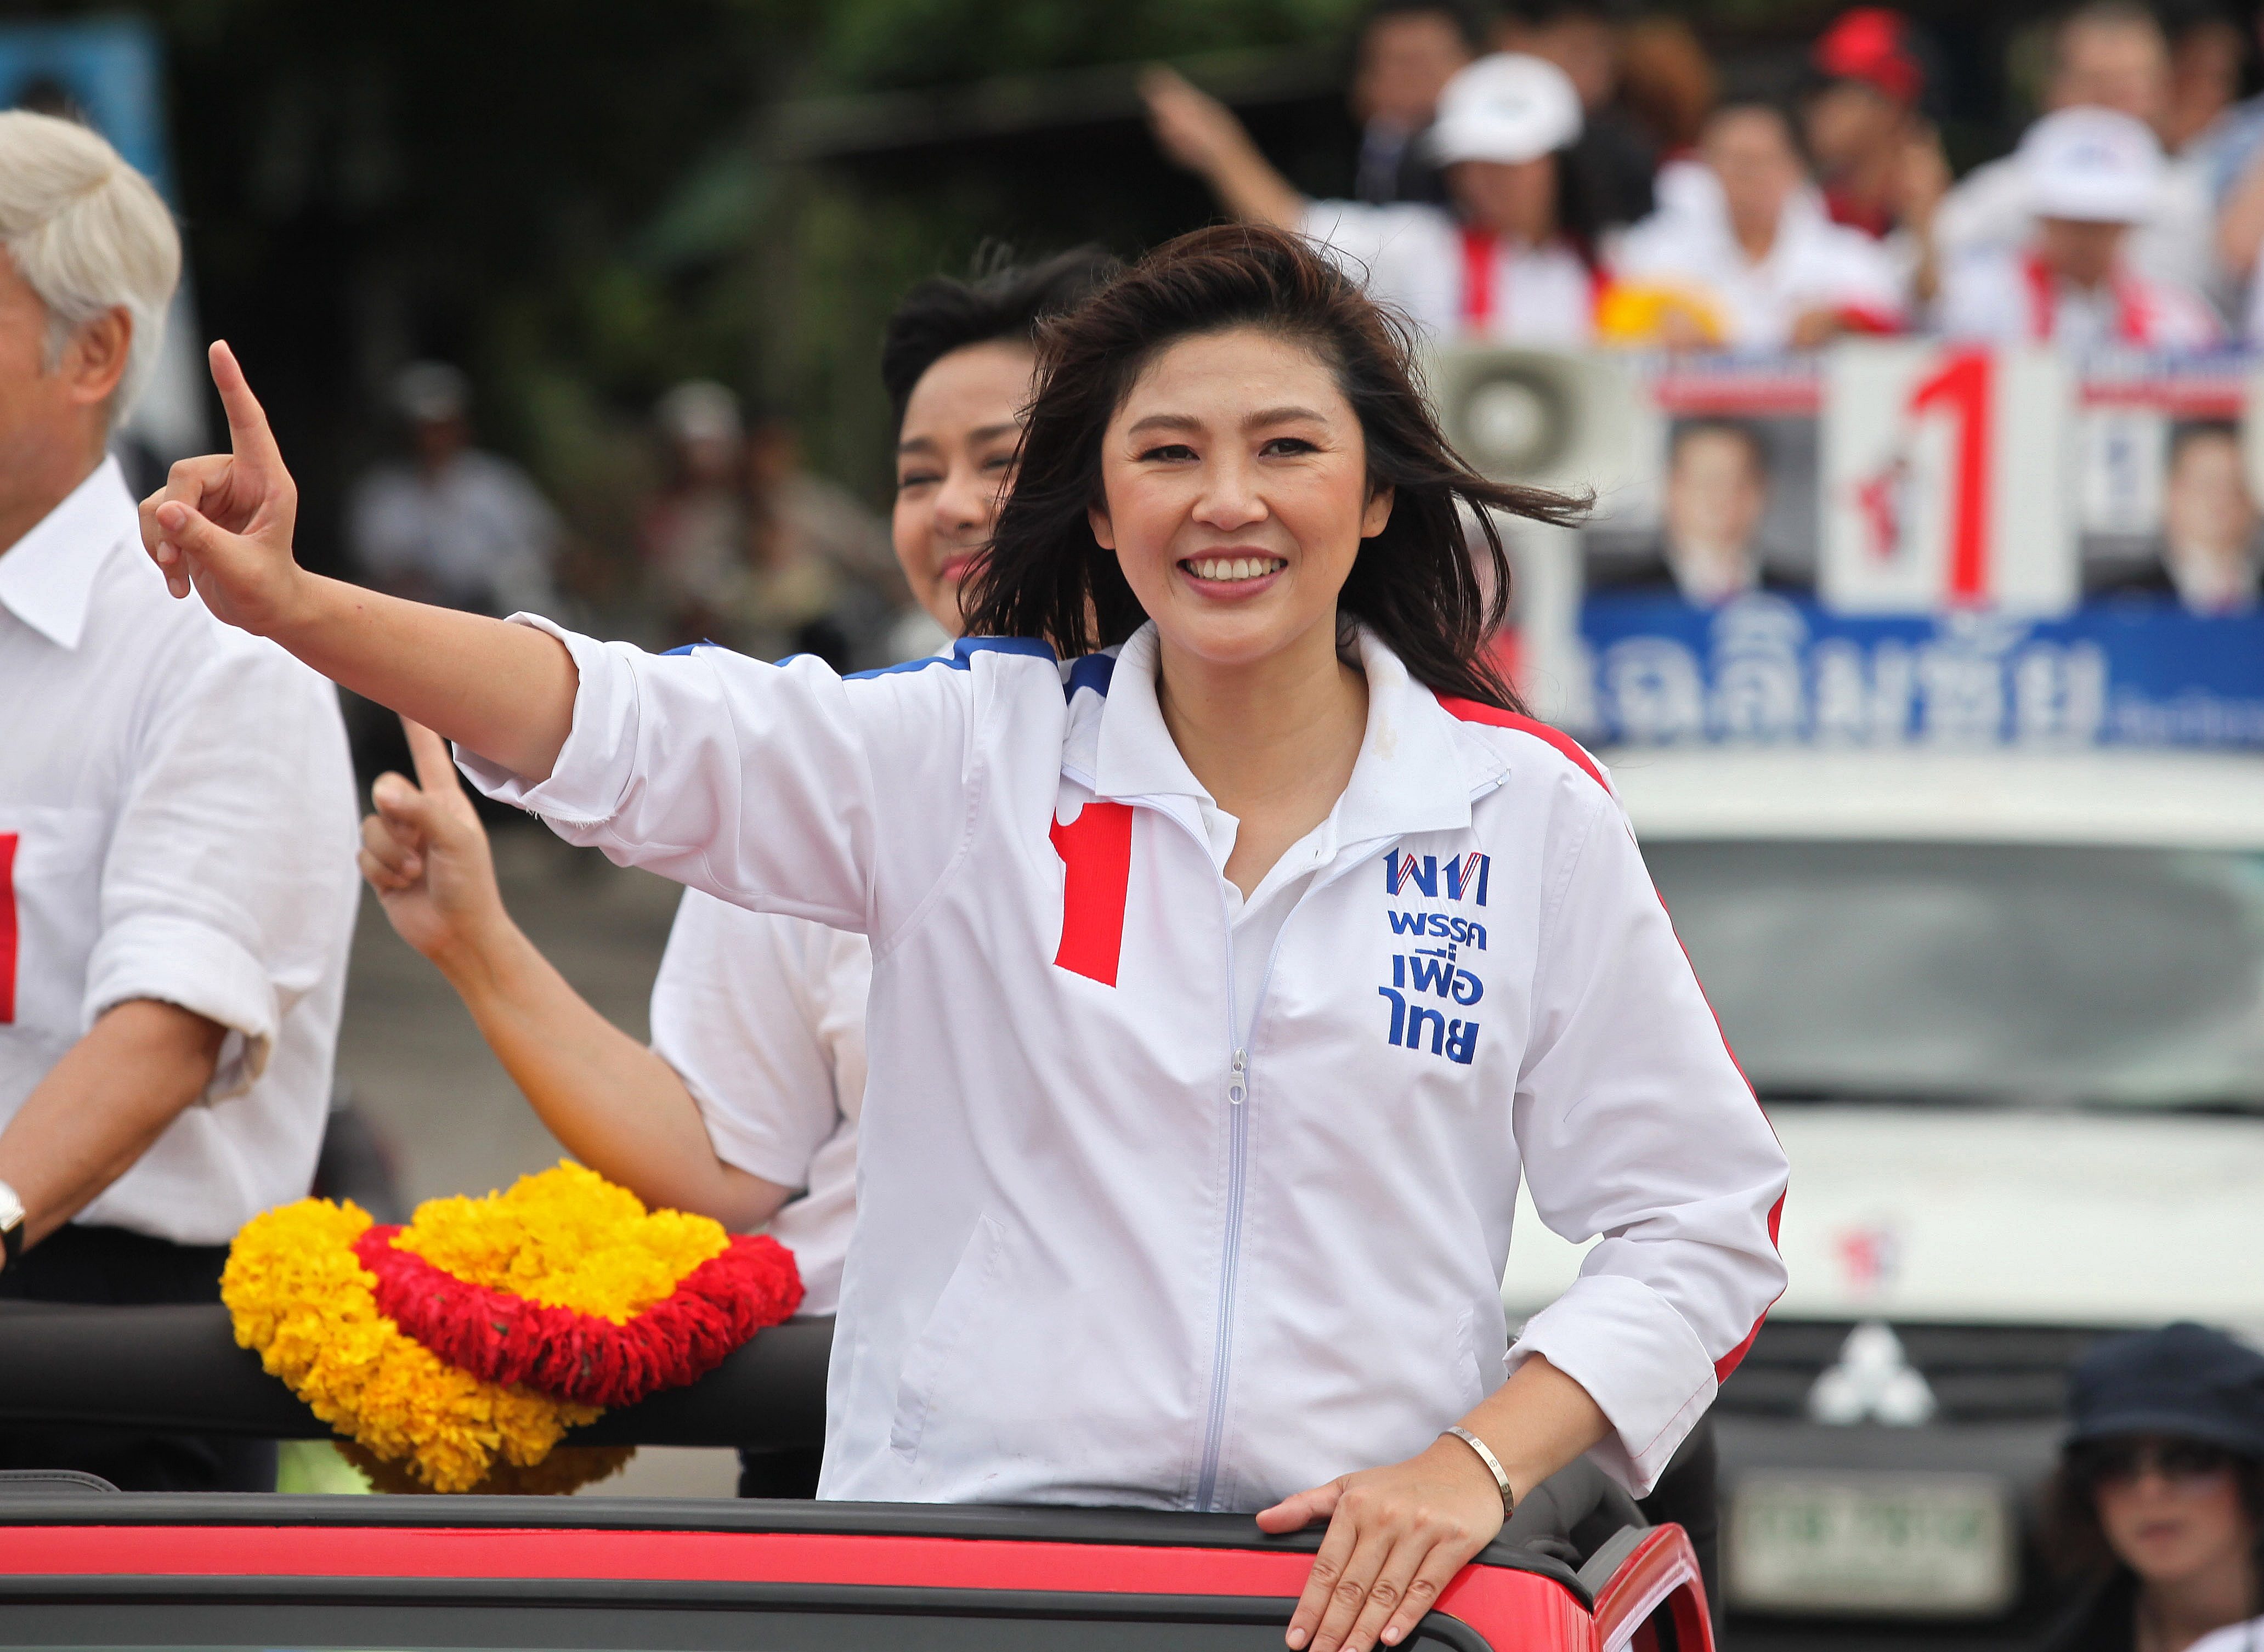 Thai opposition Puea Thai candidate Yingluck Shinawatra (C), the sister of fugitive ex-premier Thaksin Shinawatra, parades in a convoy as she campaigns in Bangkok on July 2, 2011. Thailand's rival political camps launched a last-minute appeal for votes on the eve of a hard-fought election seen as crucial to the future of the kingdom after years of often bloody unrest. AFP PHOTO / AFP PHOTO / STR